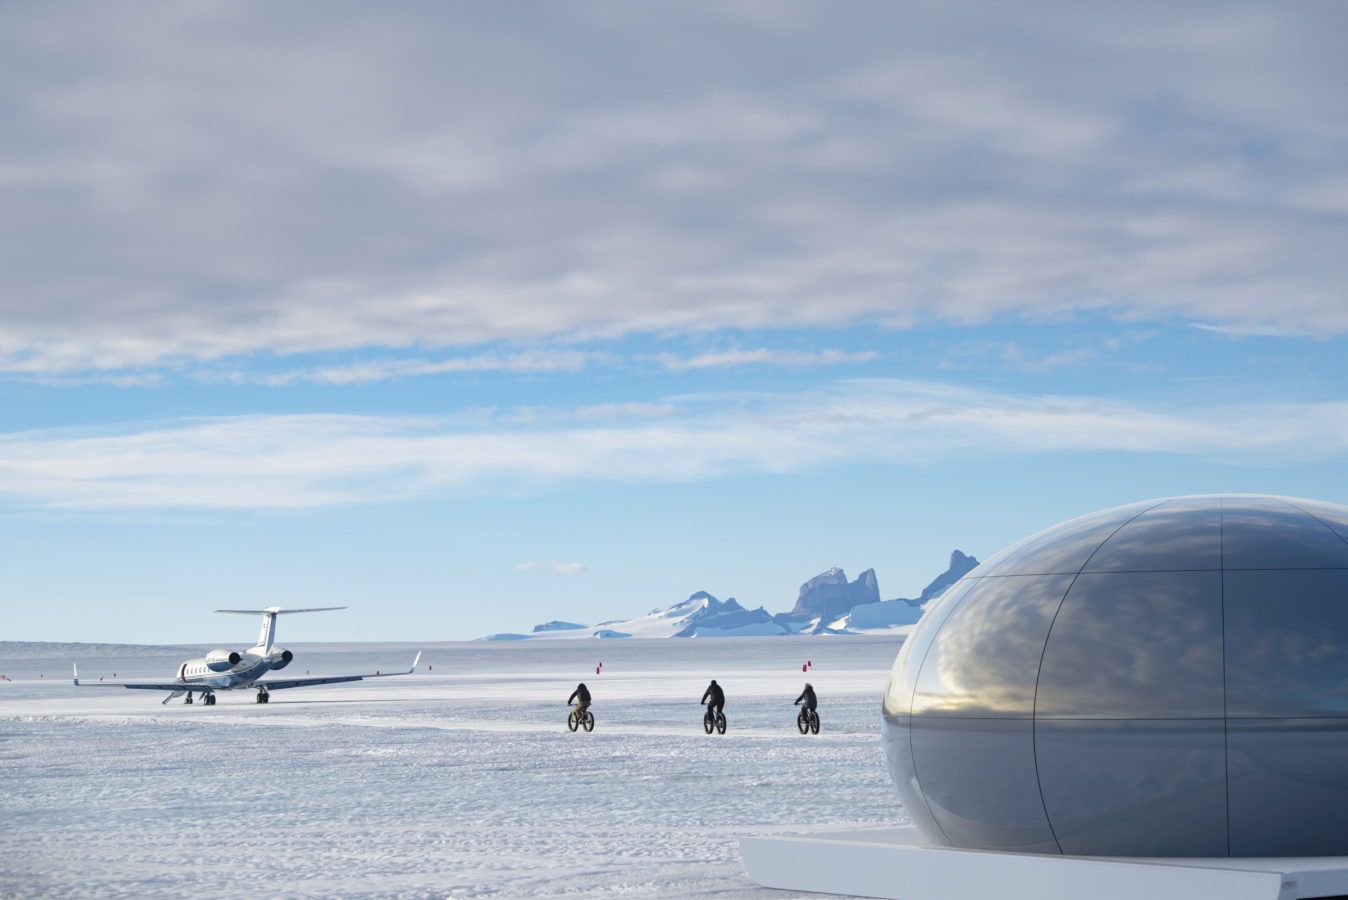 This luxury camp in Antarctica feels like a trip to outer space